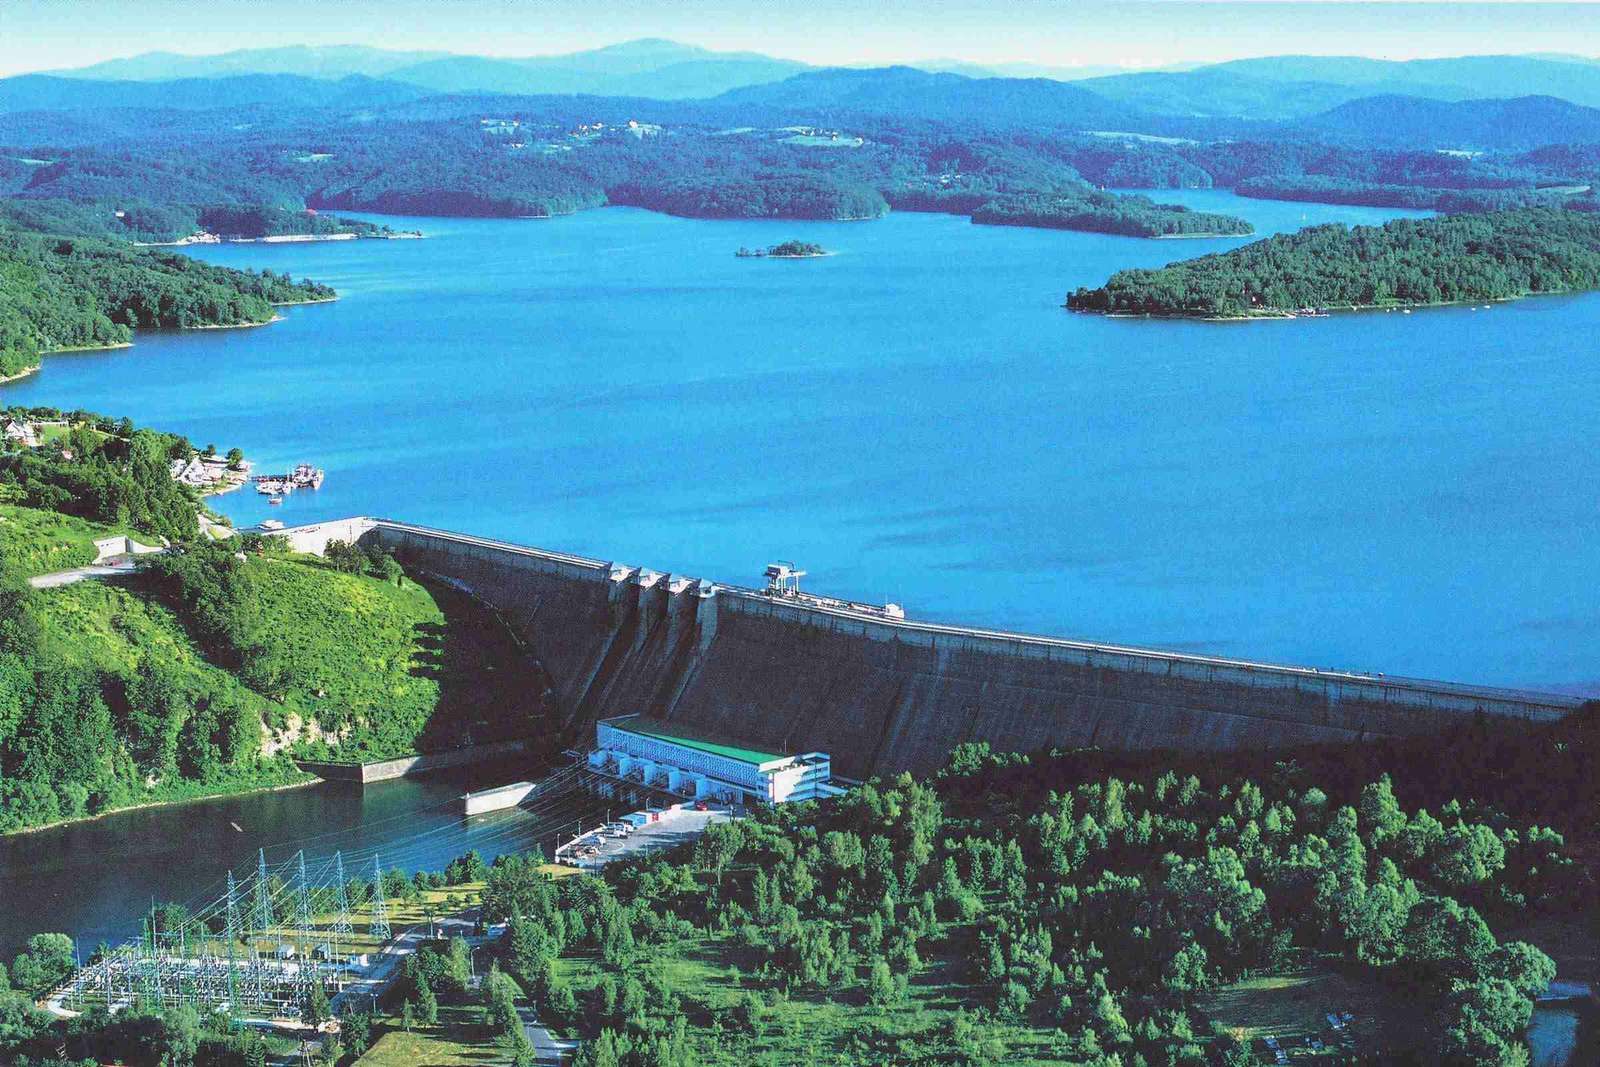 Dam on Solina jigsaw puzzle online